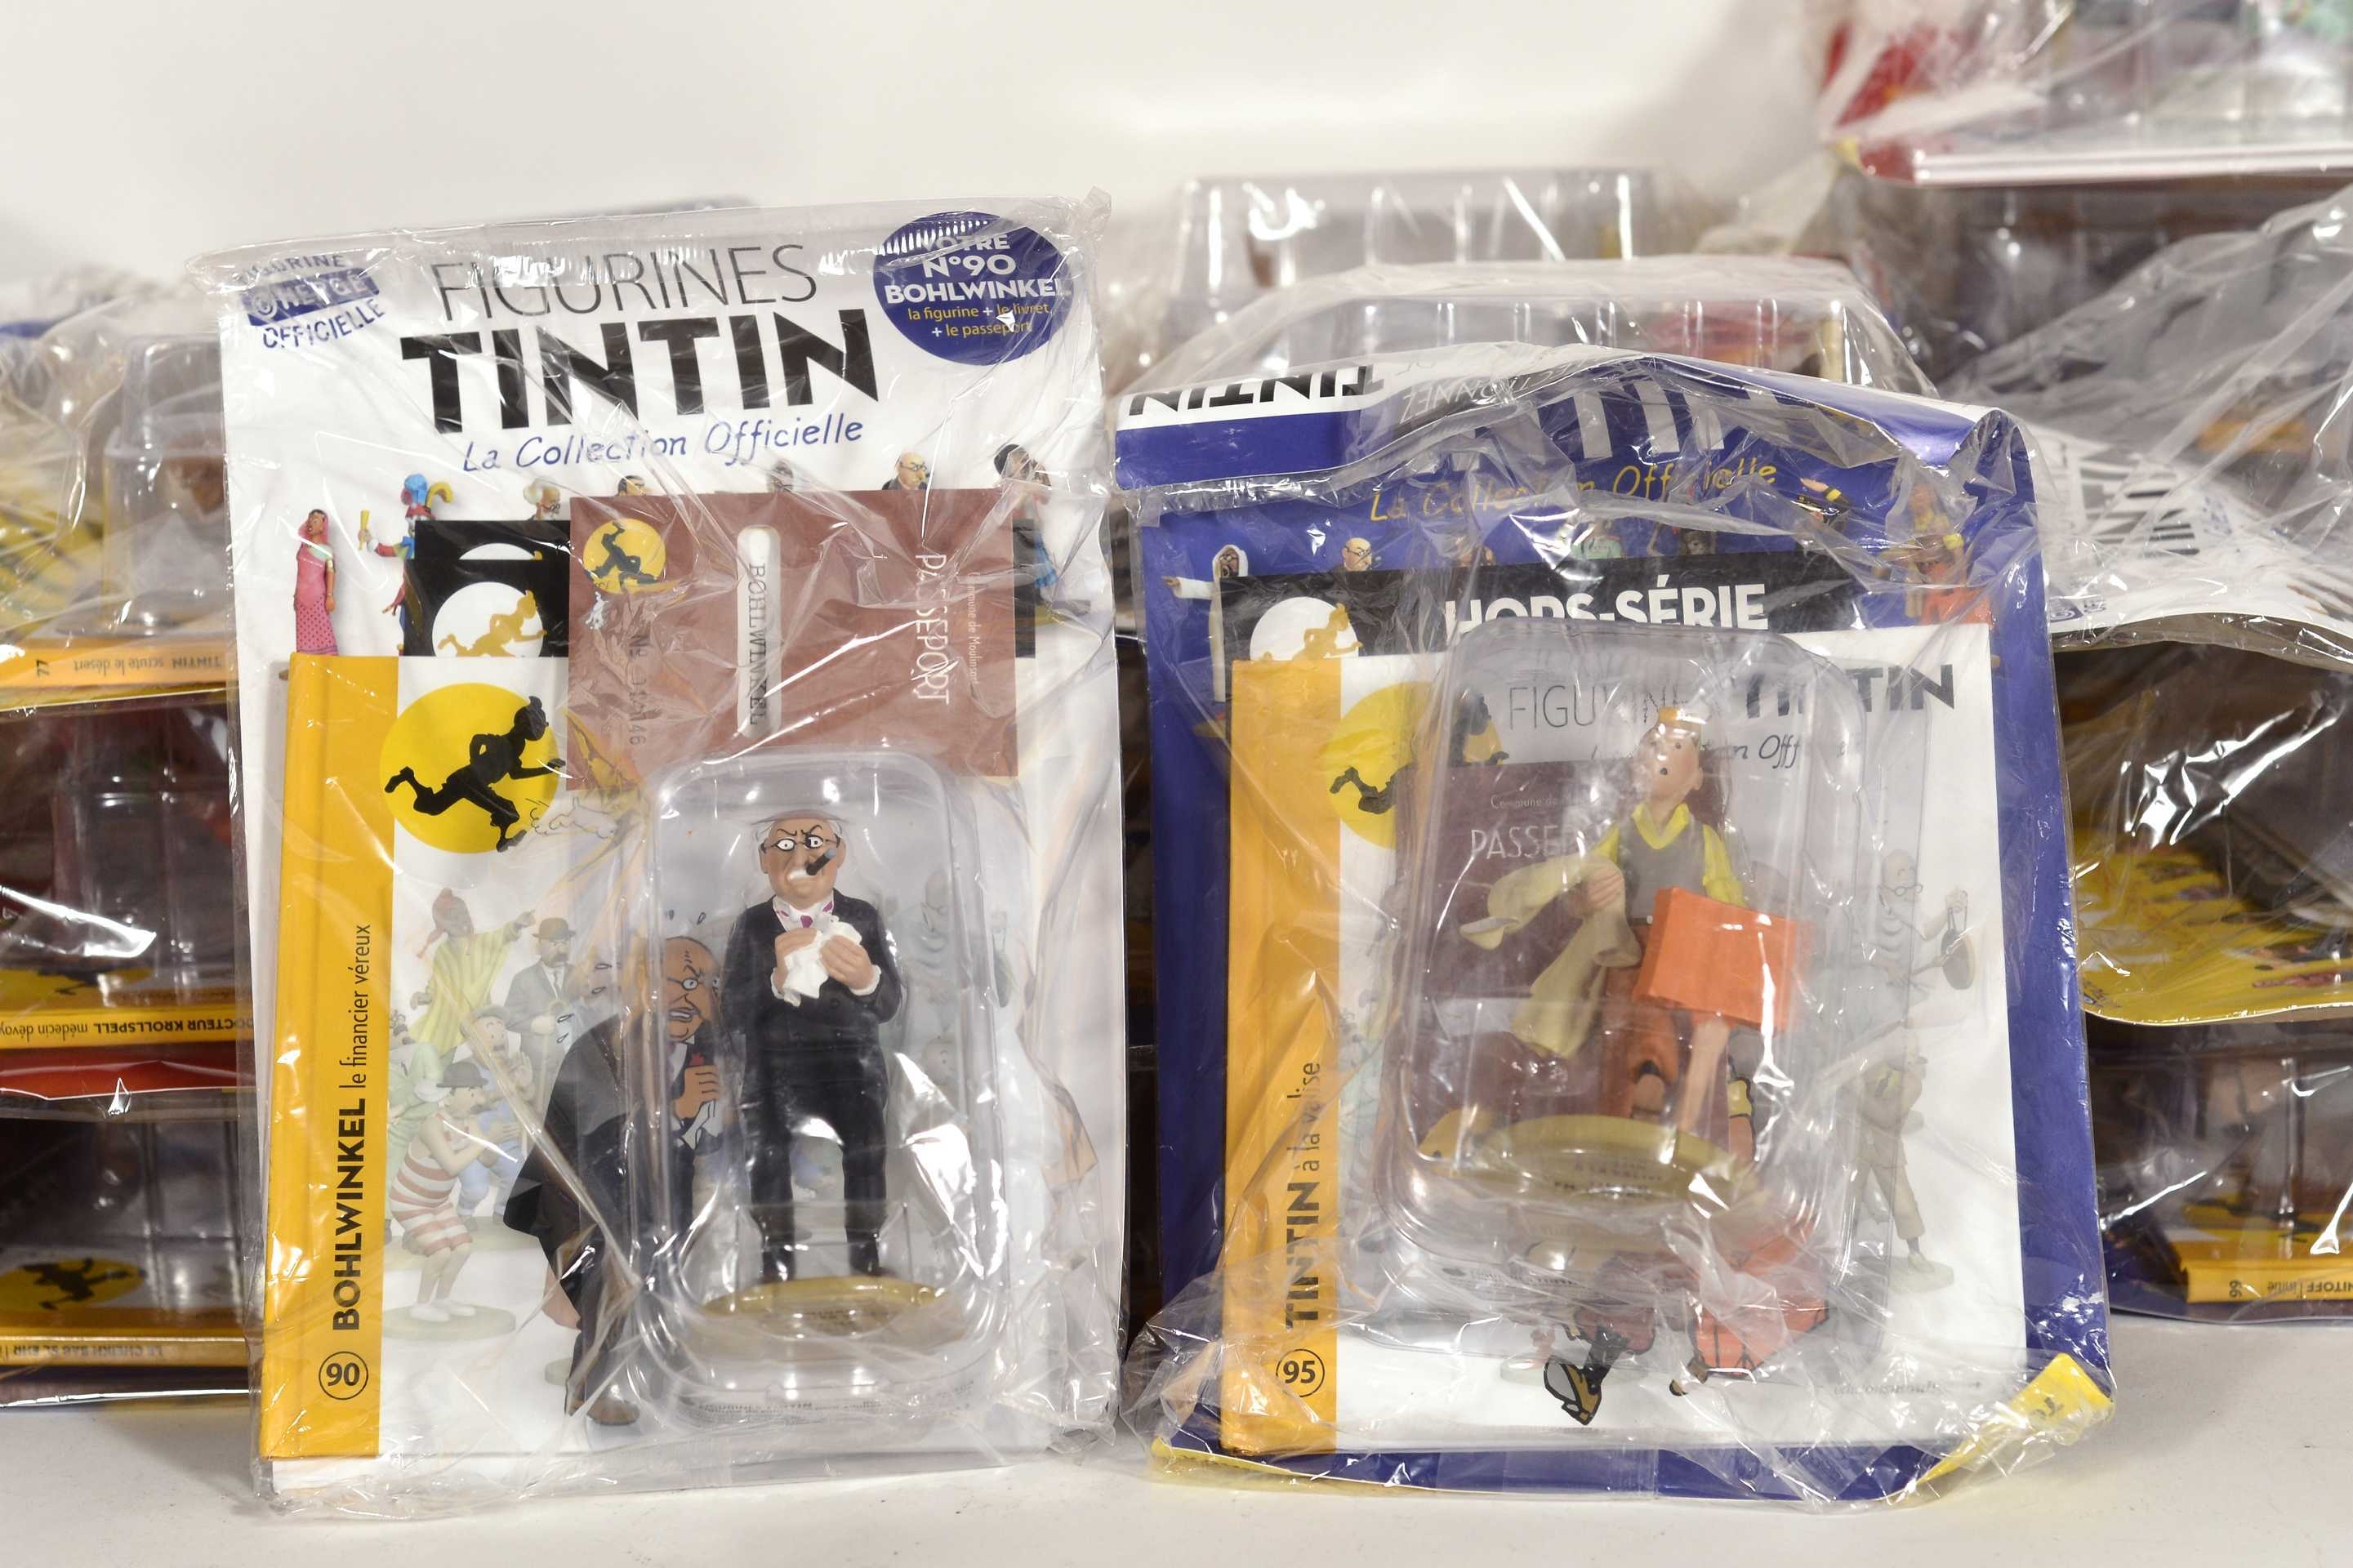 FIGURINES TINTIN, LA COLLECTION OFFICIELLE.